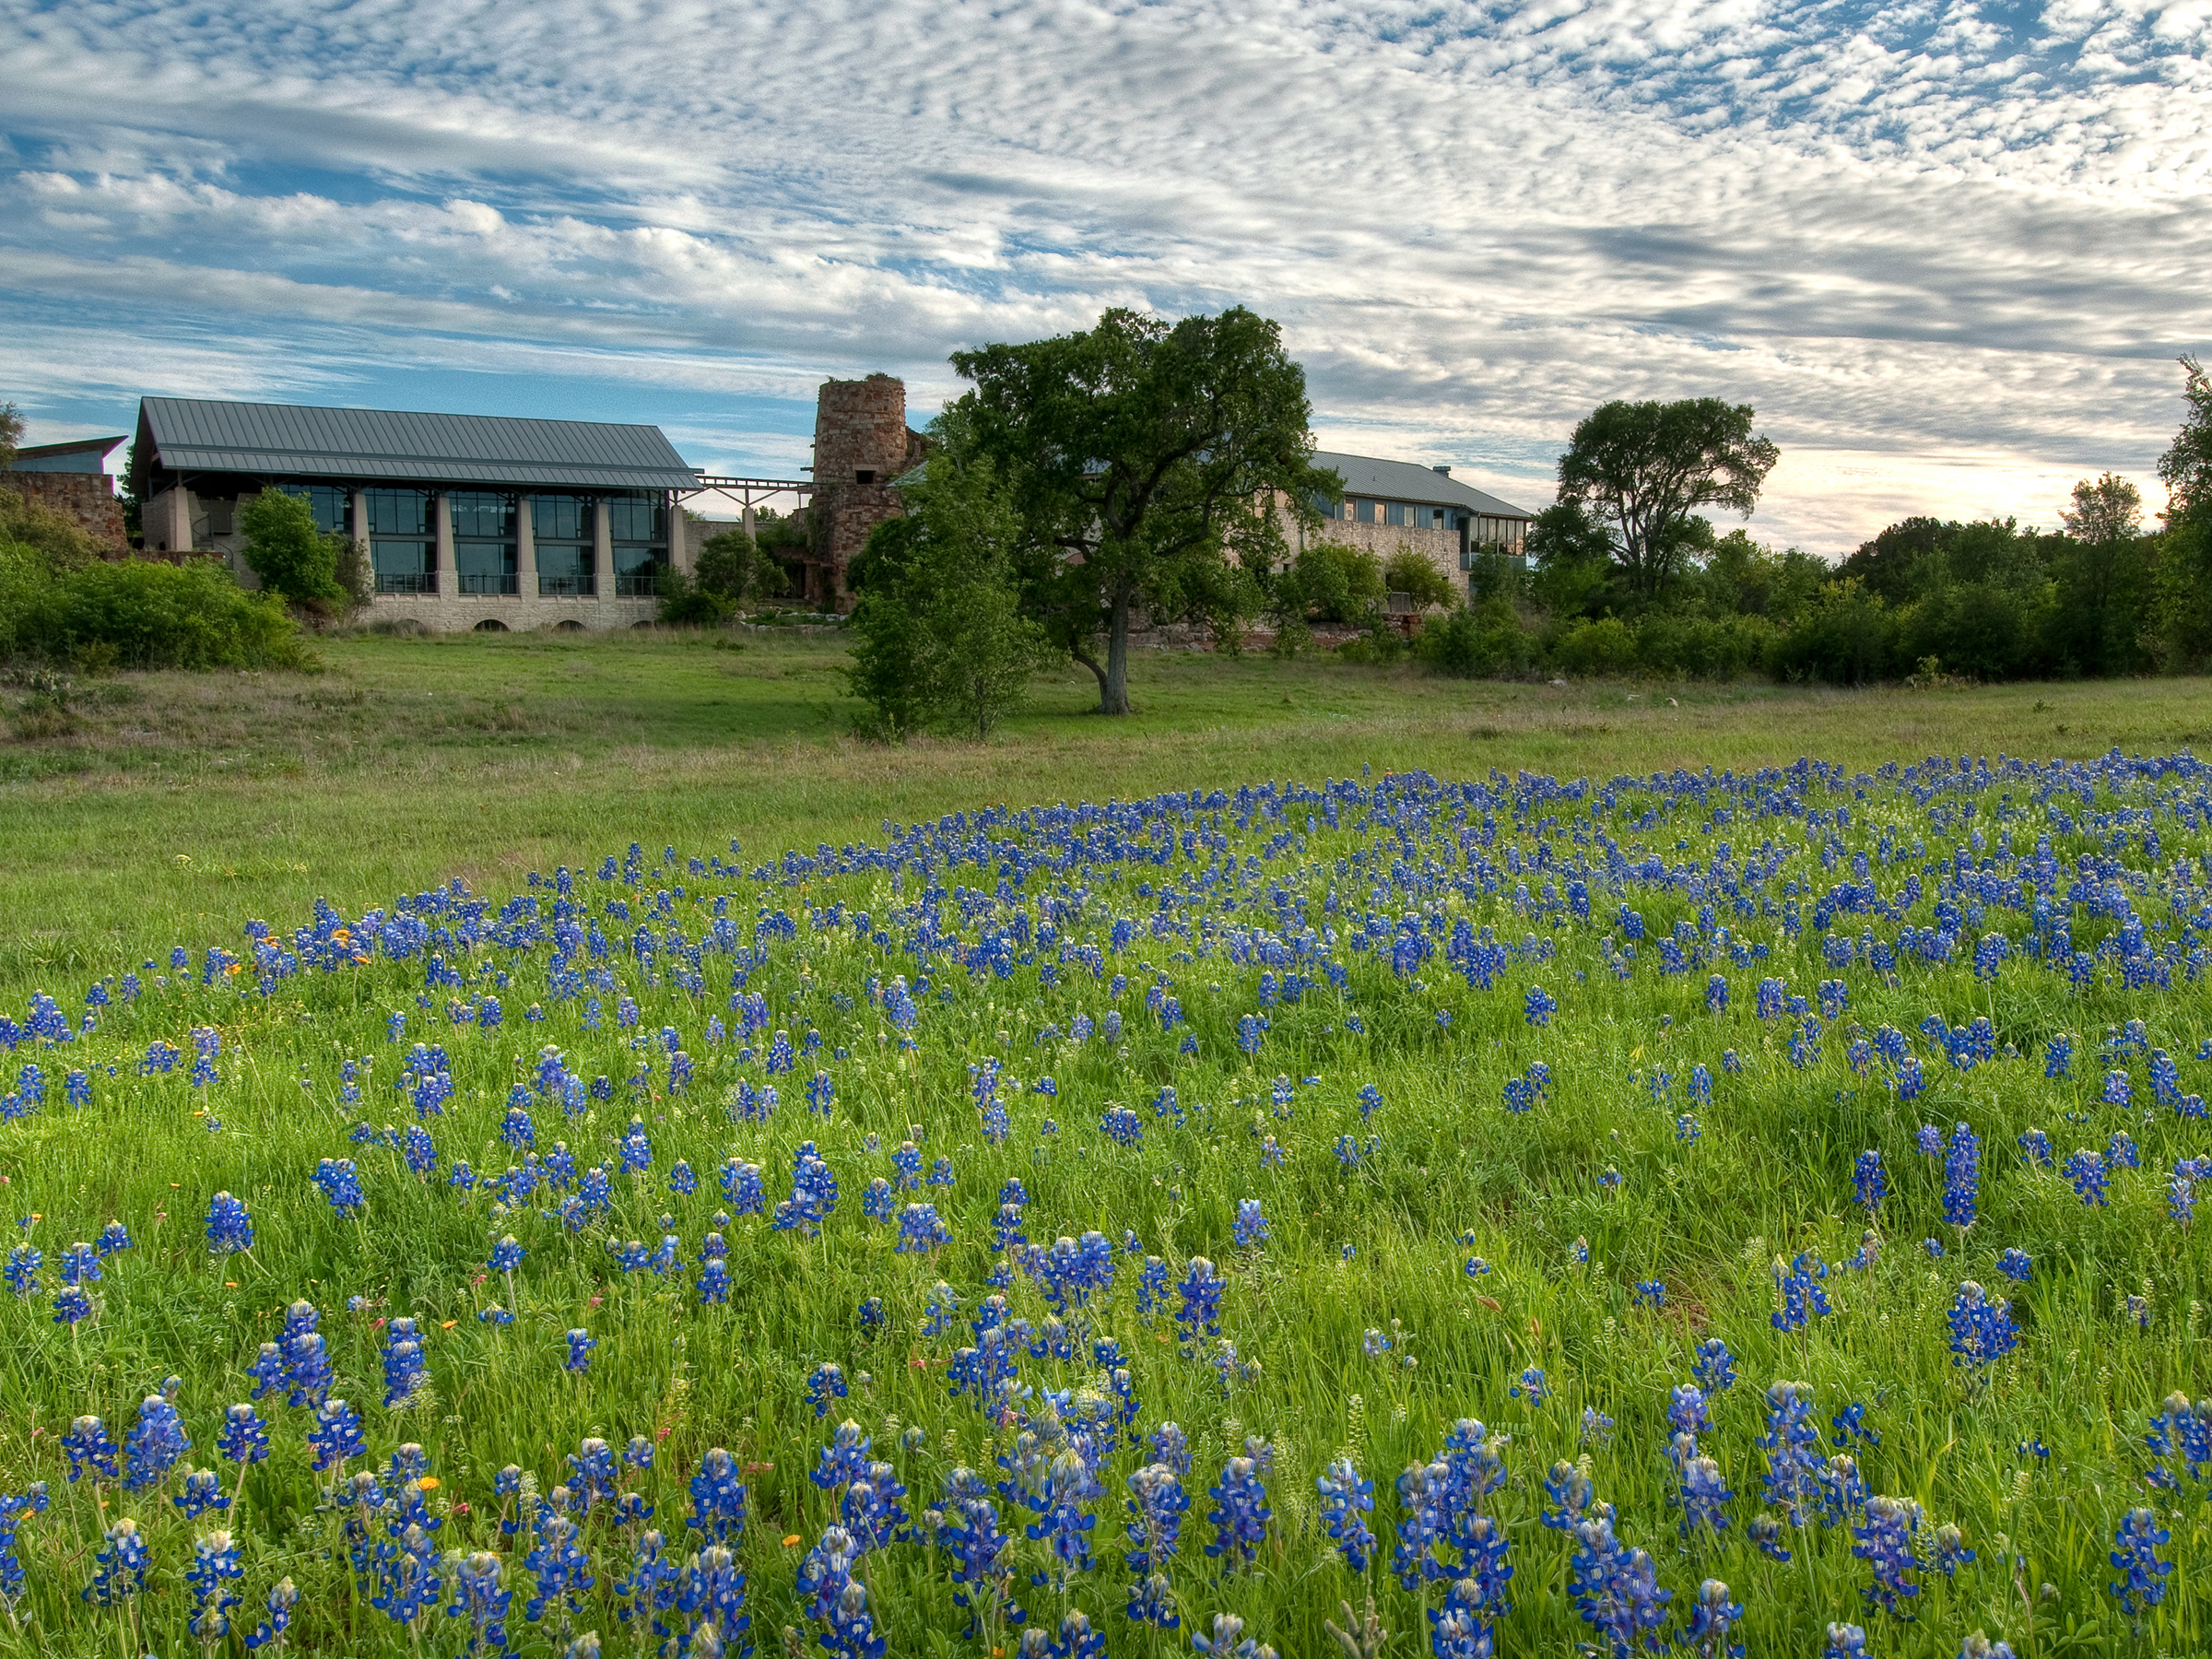 A photo of facilities amongst a field of bluebonnet flowers at the Lady Bird Johnson Wildflower Center